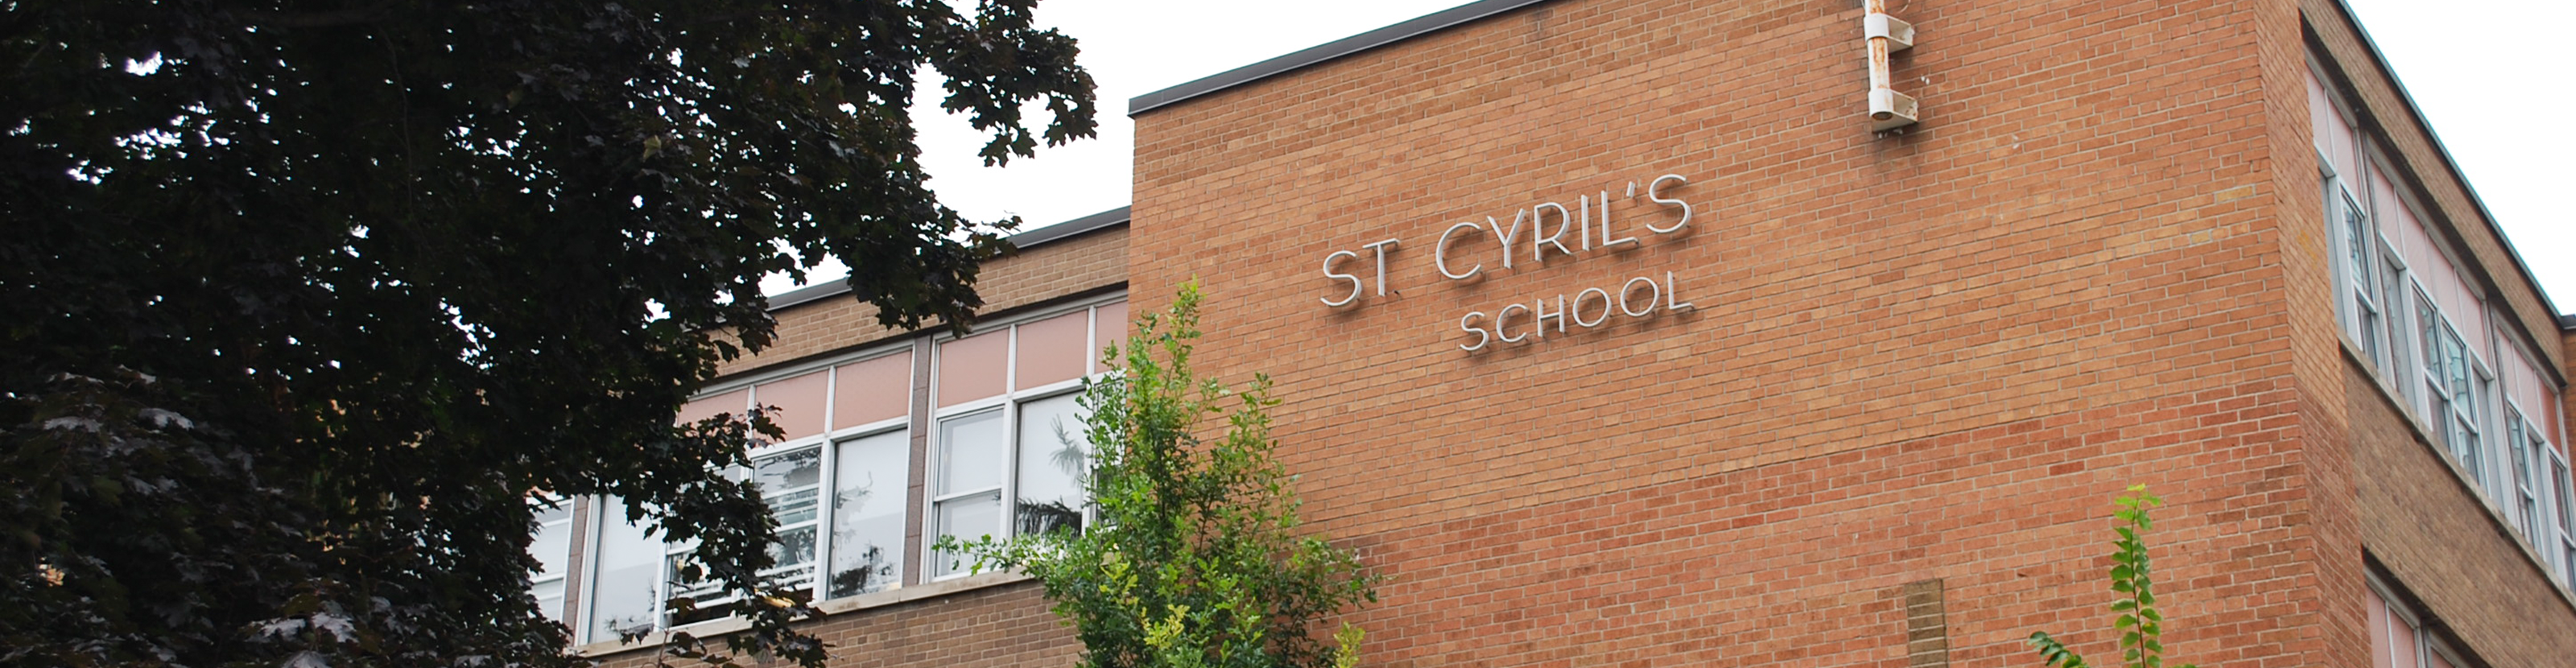 The front of the St. Cyril Catholic School building.